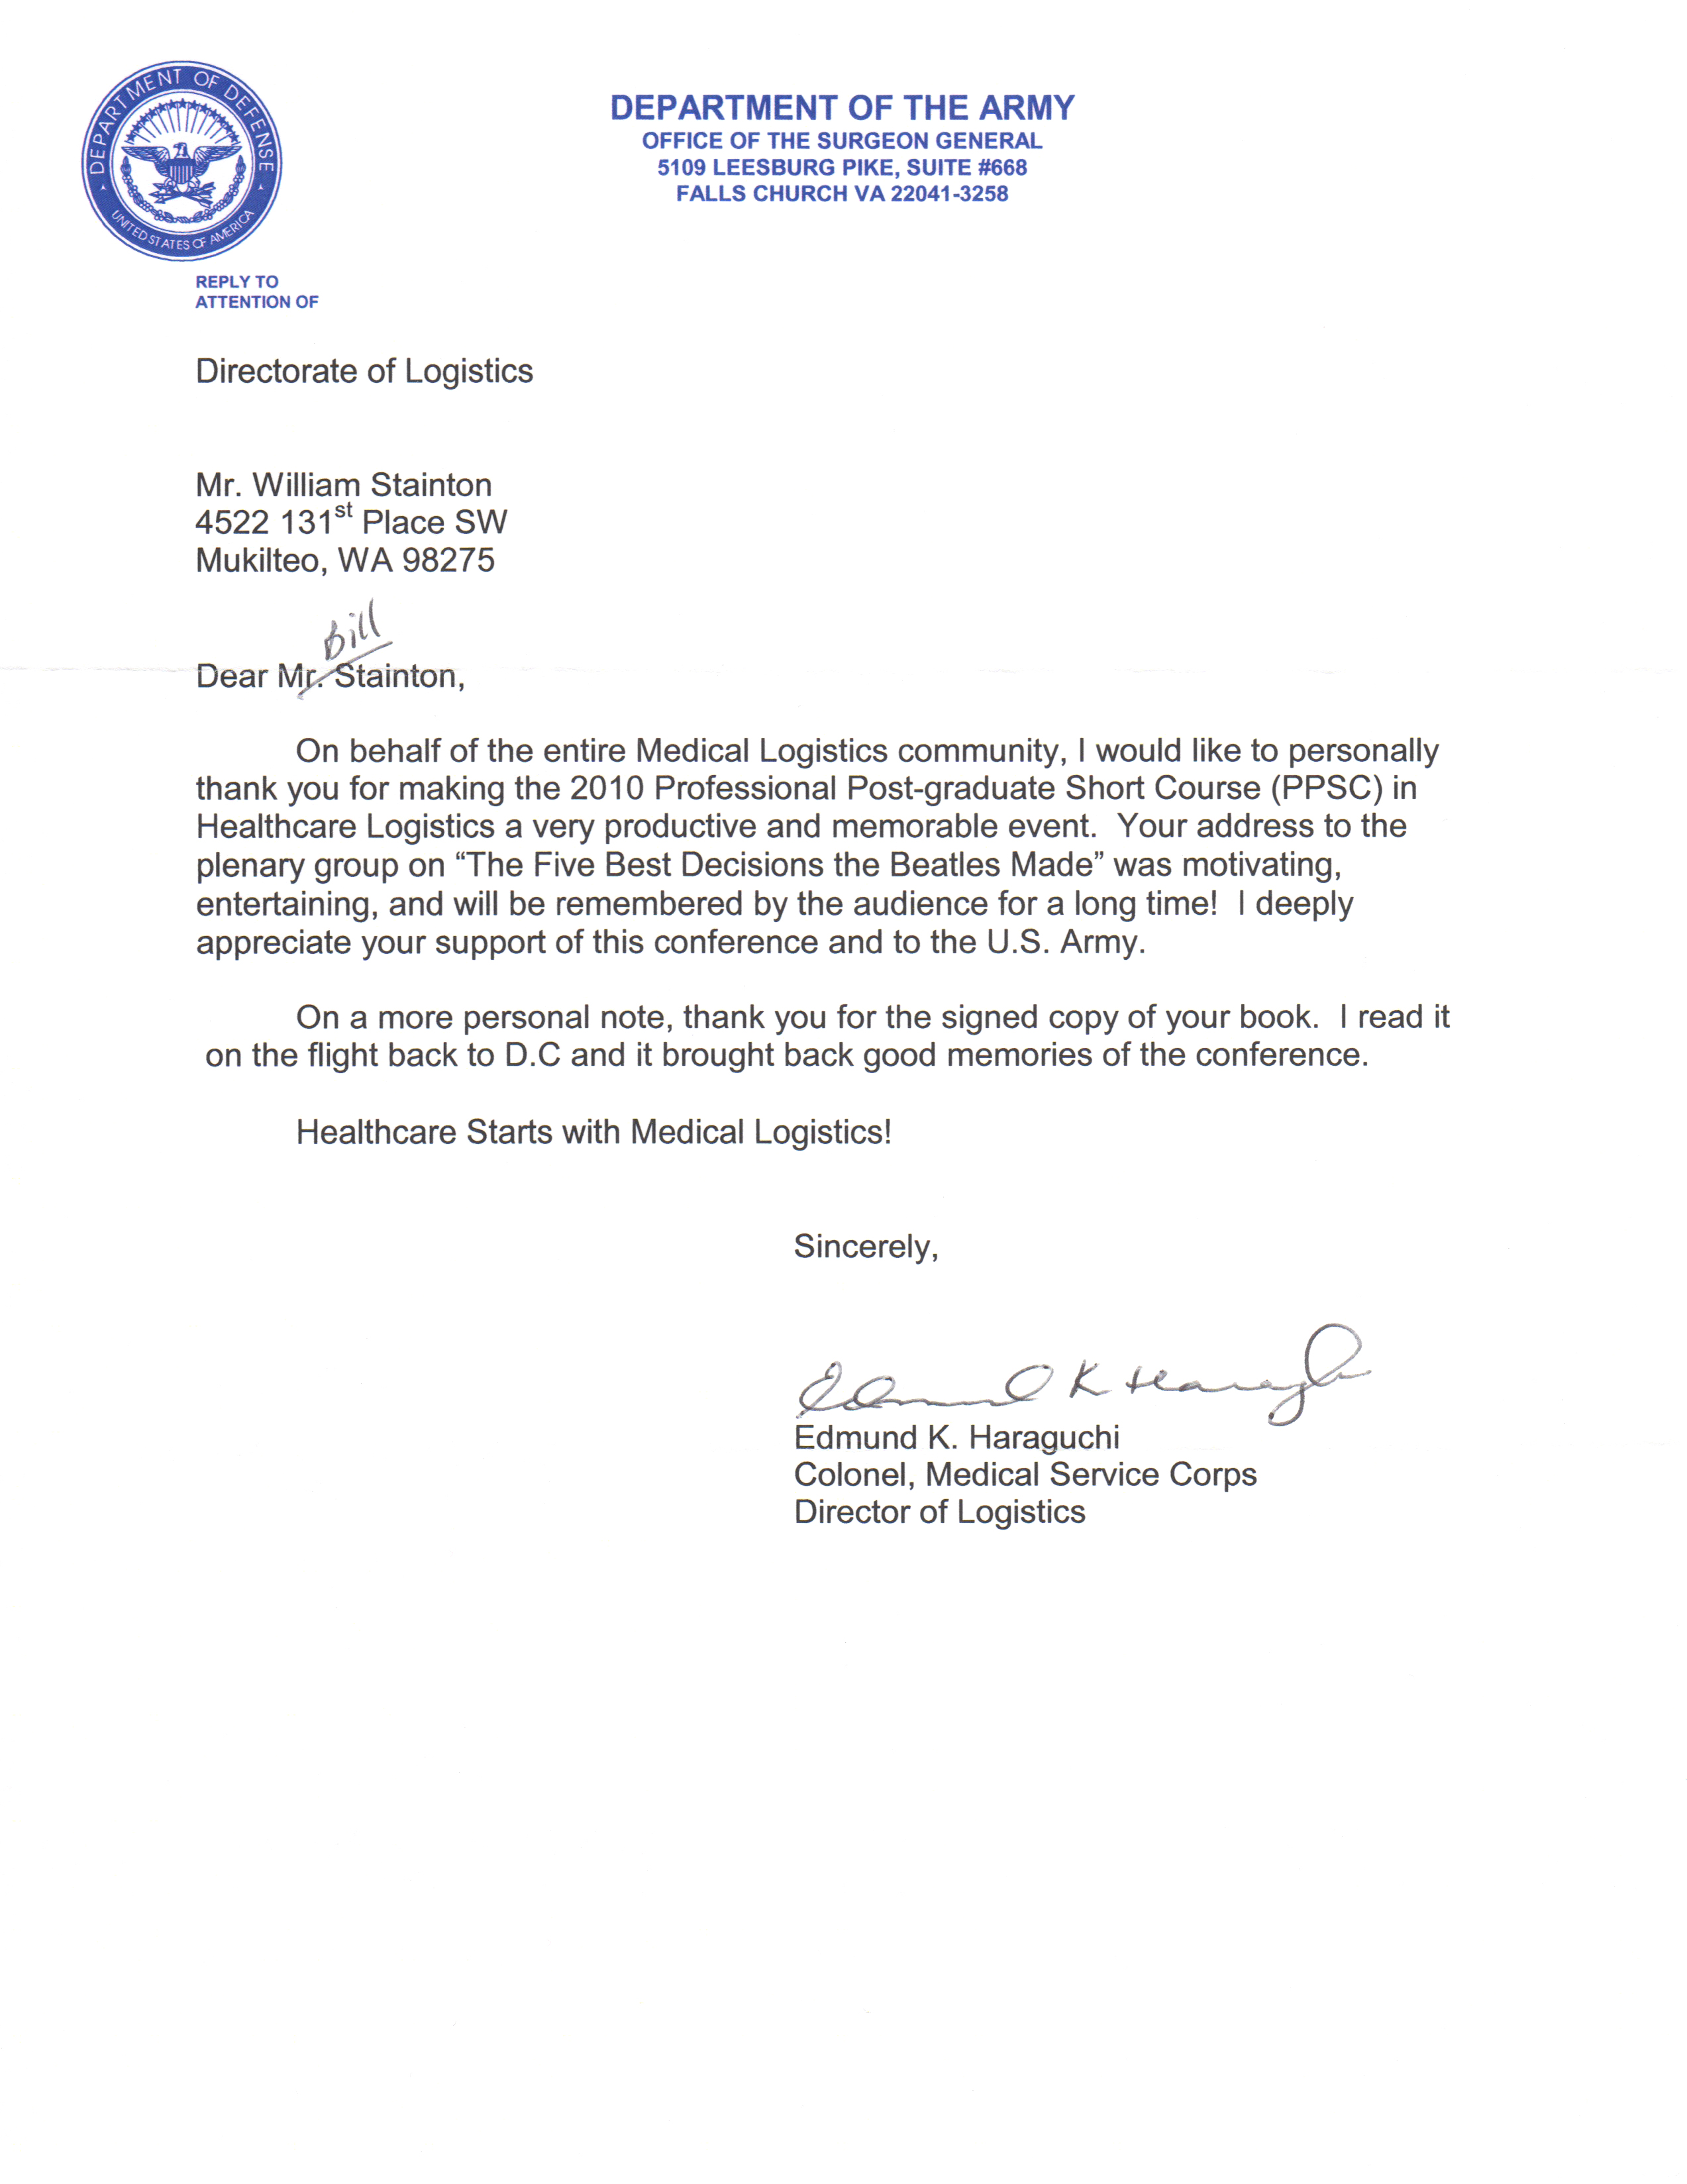 U.S. Army testimonial letter - The Executive Producer